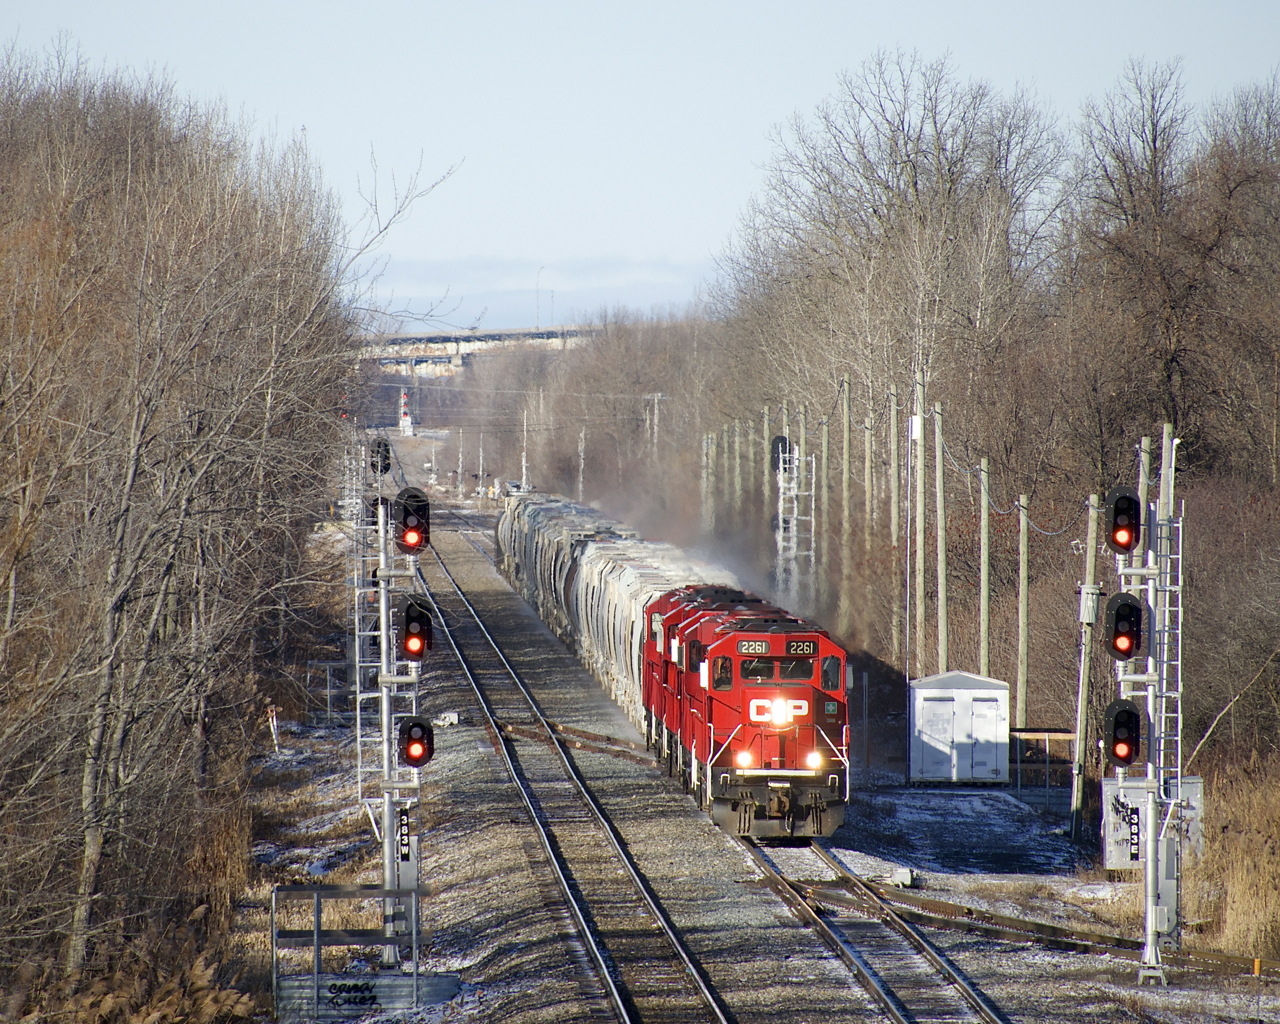 Five GP20C-ECO's (CP 2261, CP 2285, CP 2307, CP 2253 & CP 2257) lead CP F94 through the plant at Lavallée (named after CP employee and historian Omer Lavallée), where the Seaway Spur leaves the Adirondack Sub.